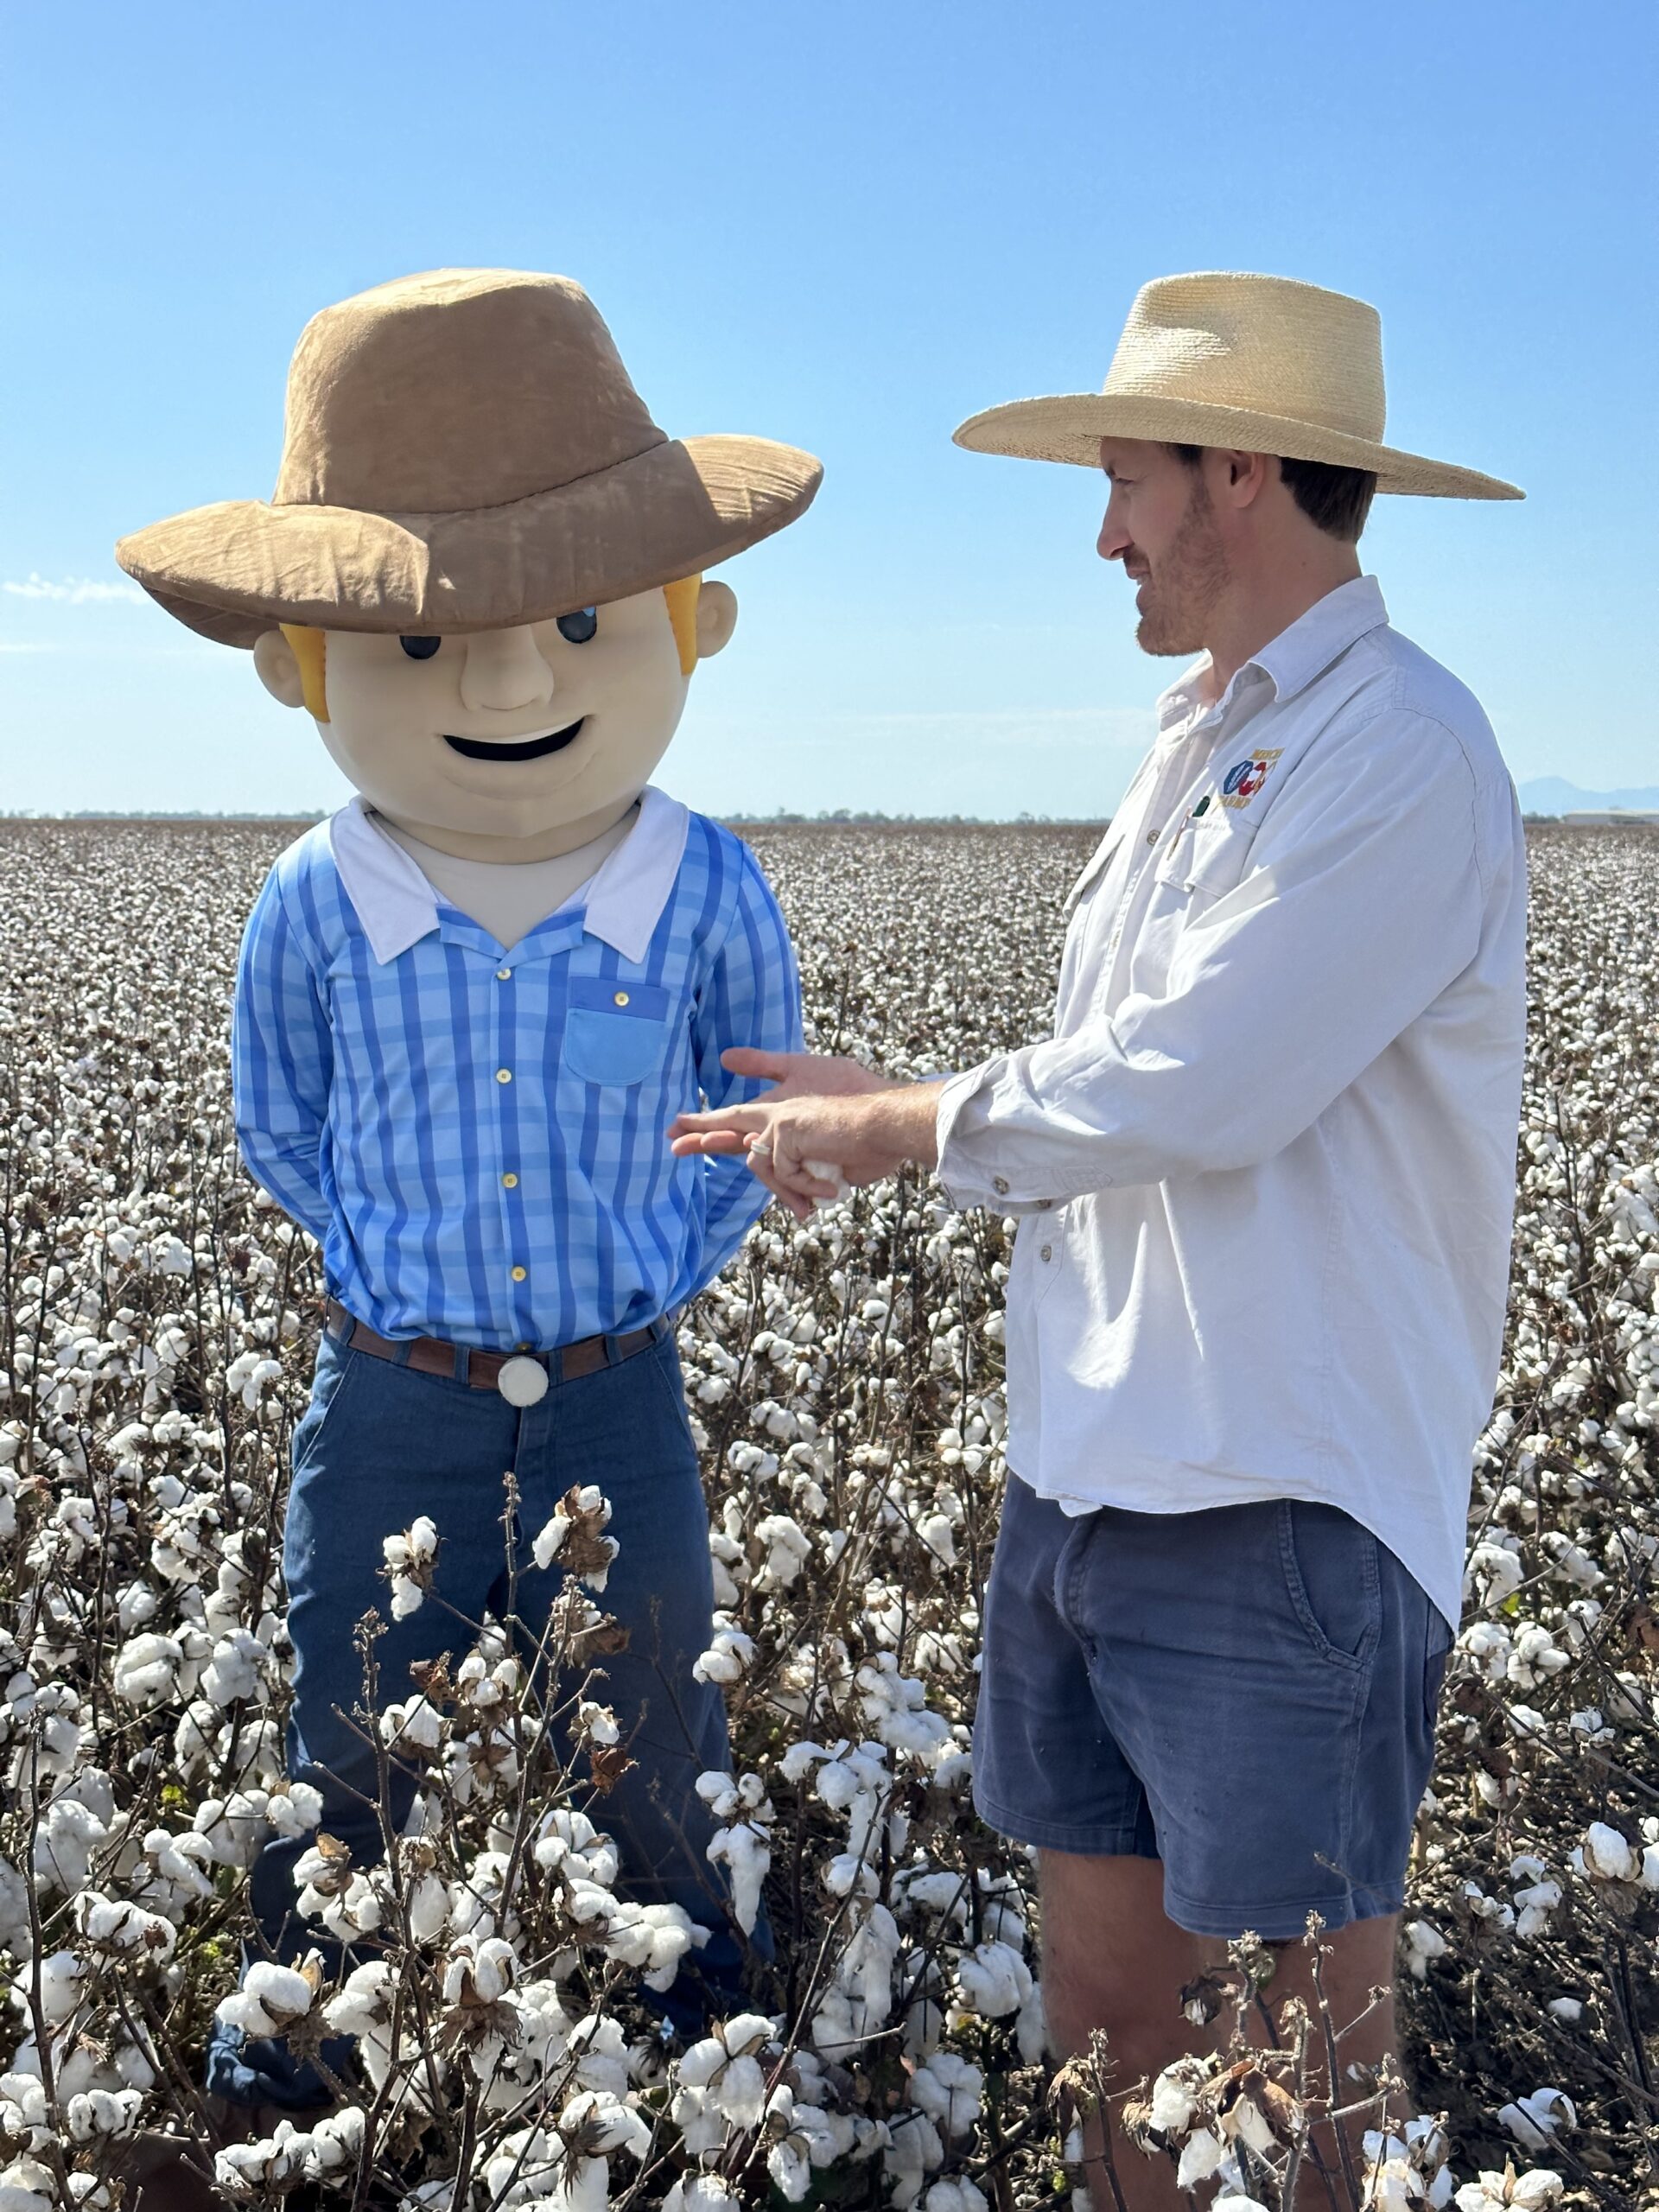 George the Farmer with Wee Waa farmer Daniel Kahl in a cotton field on his family’s property. The much-loved children’s character had the chance to see and feel cotton in all its white fluffy glory and meet members of the Merced Farming family and team during filming. Cotton Australia said it has been working with George the Farmer creator Simone Kain to produce a new farming adventure about Australian cotton. And what better time to visit the district than during cotton picking season.